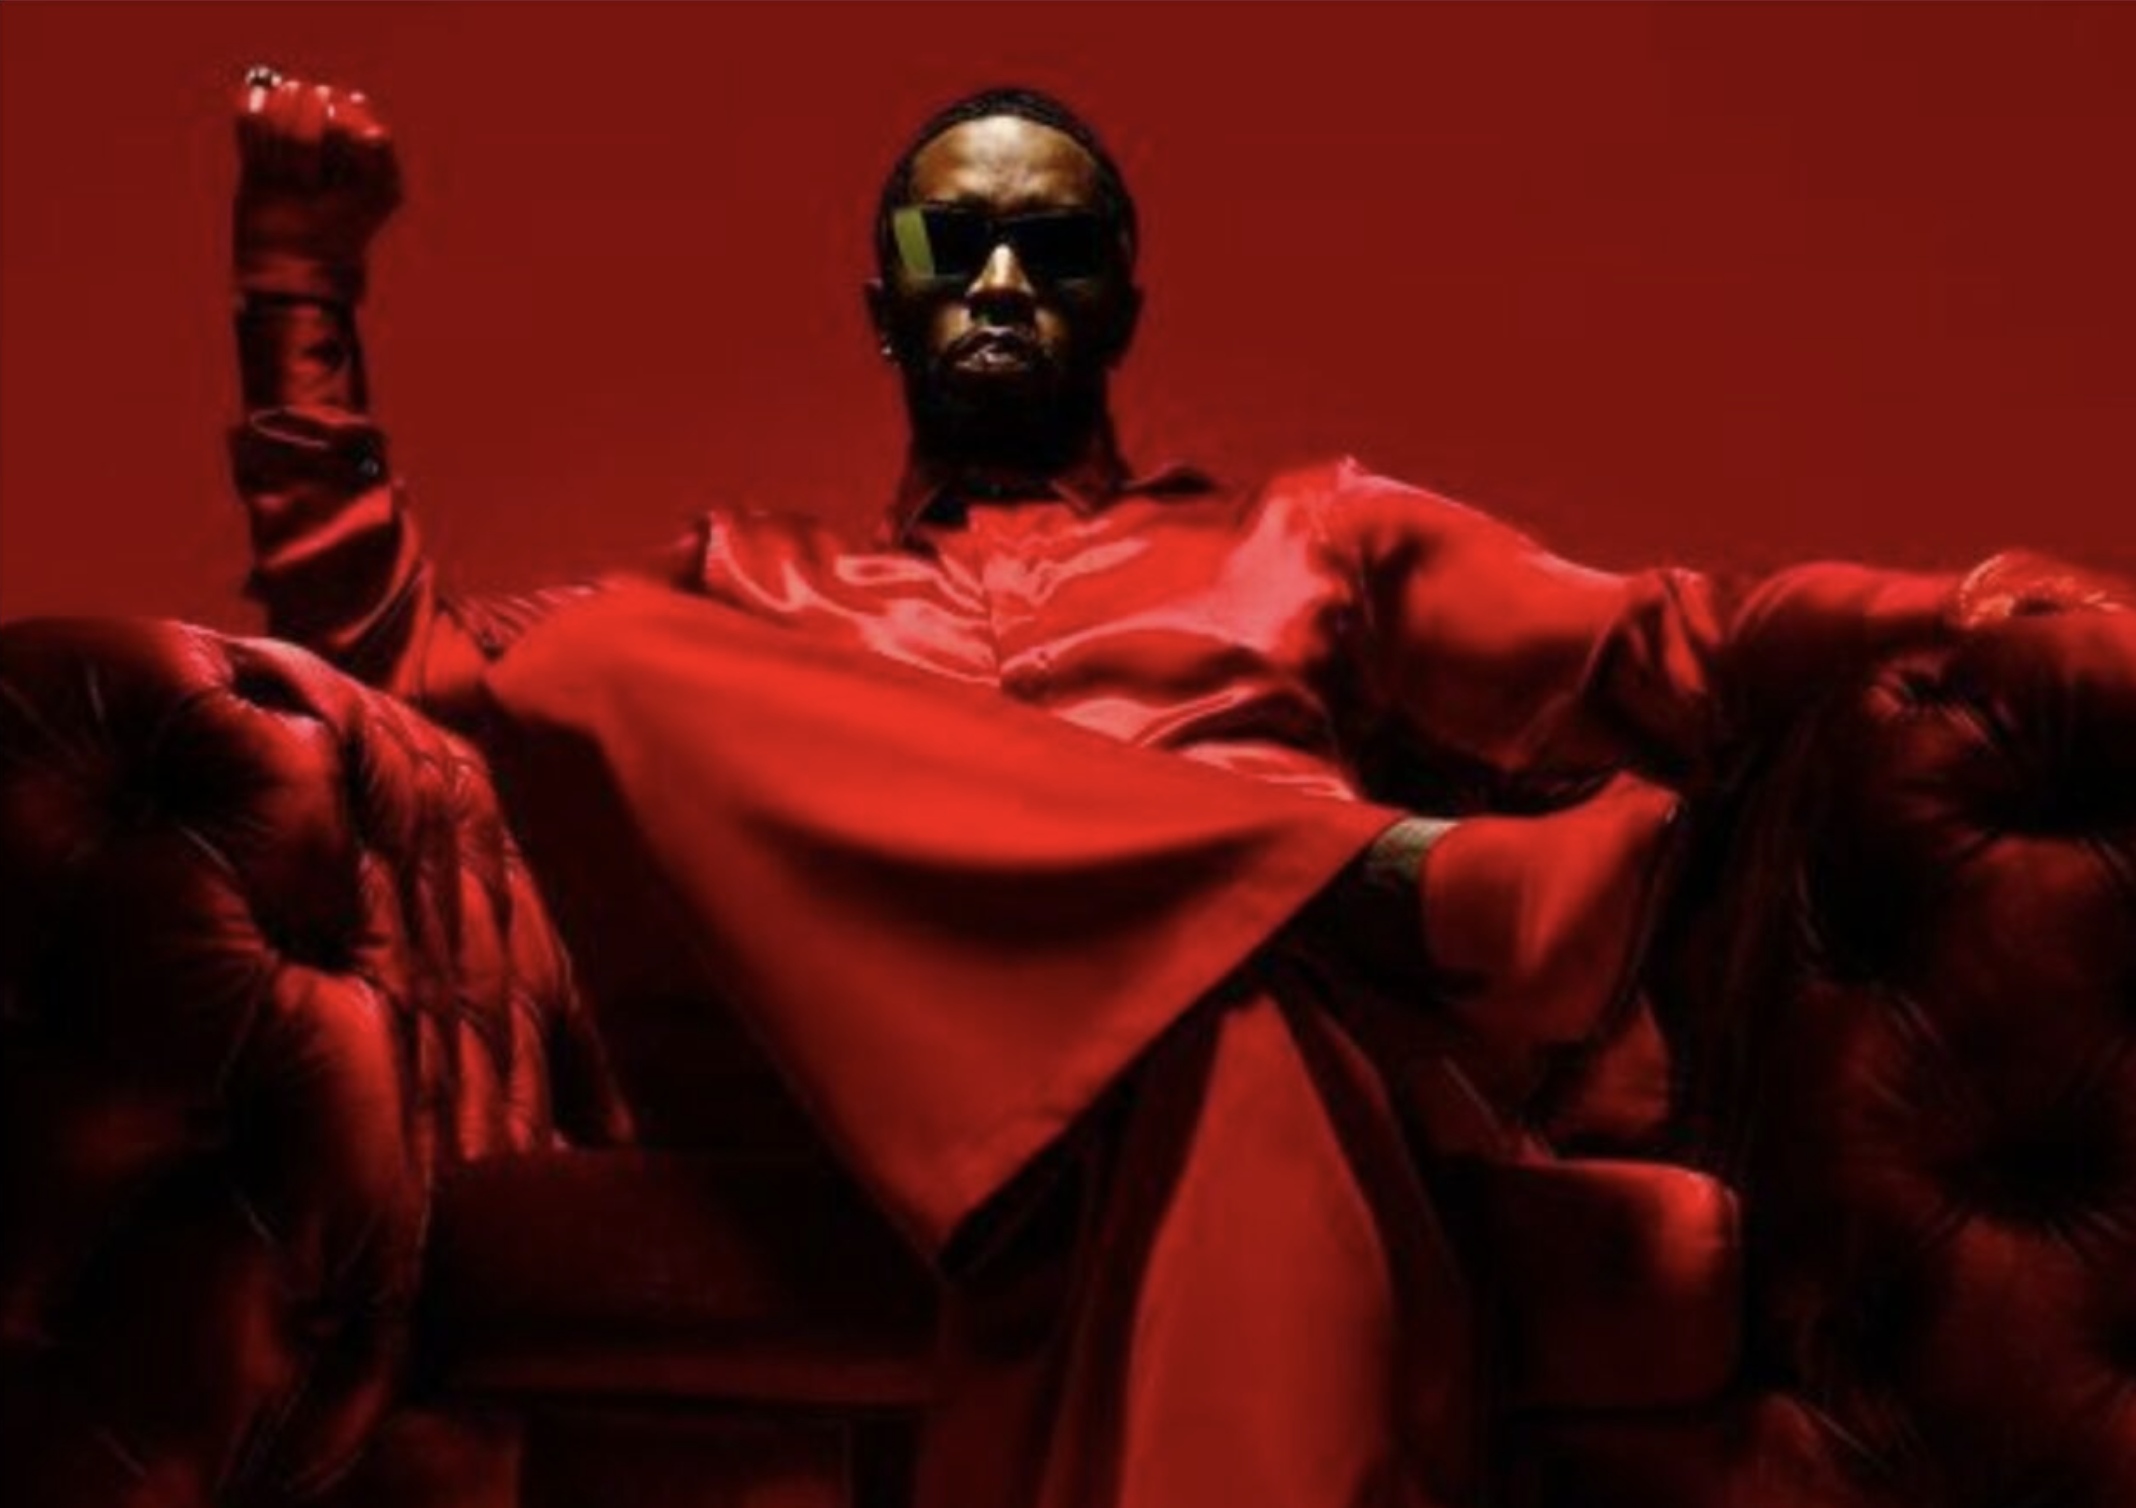 Sean “Diddy” Combs will make his return to R&B with ‘The Love Album: Off the Grid’